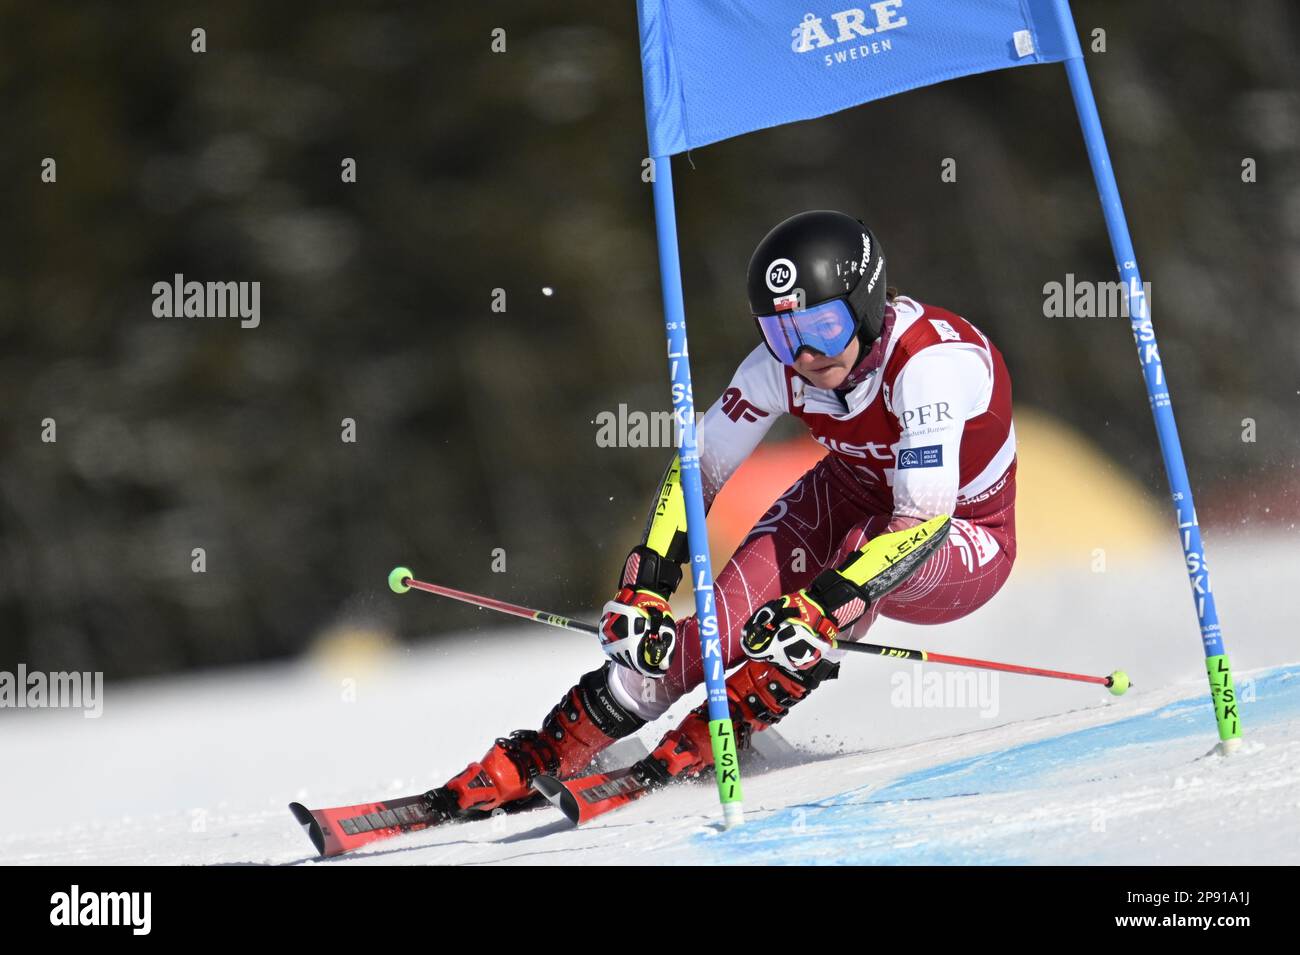 YEAR 20230310 Maryna Gasienica-Daniel, Poland, during the first run in the giant slalom competition in the World Cup, Åre.  Photo: Pontus Lundahl / TT Stock Photo